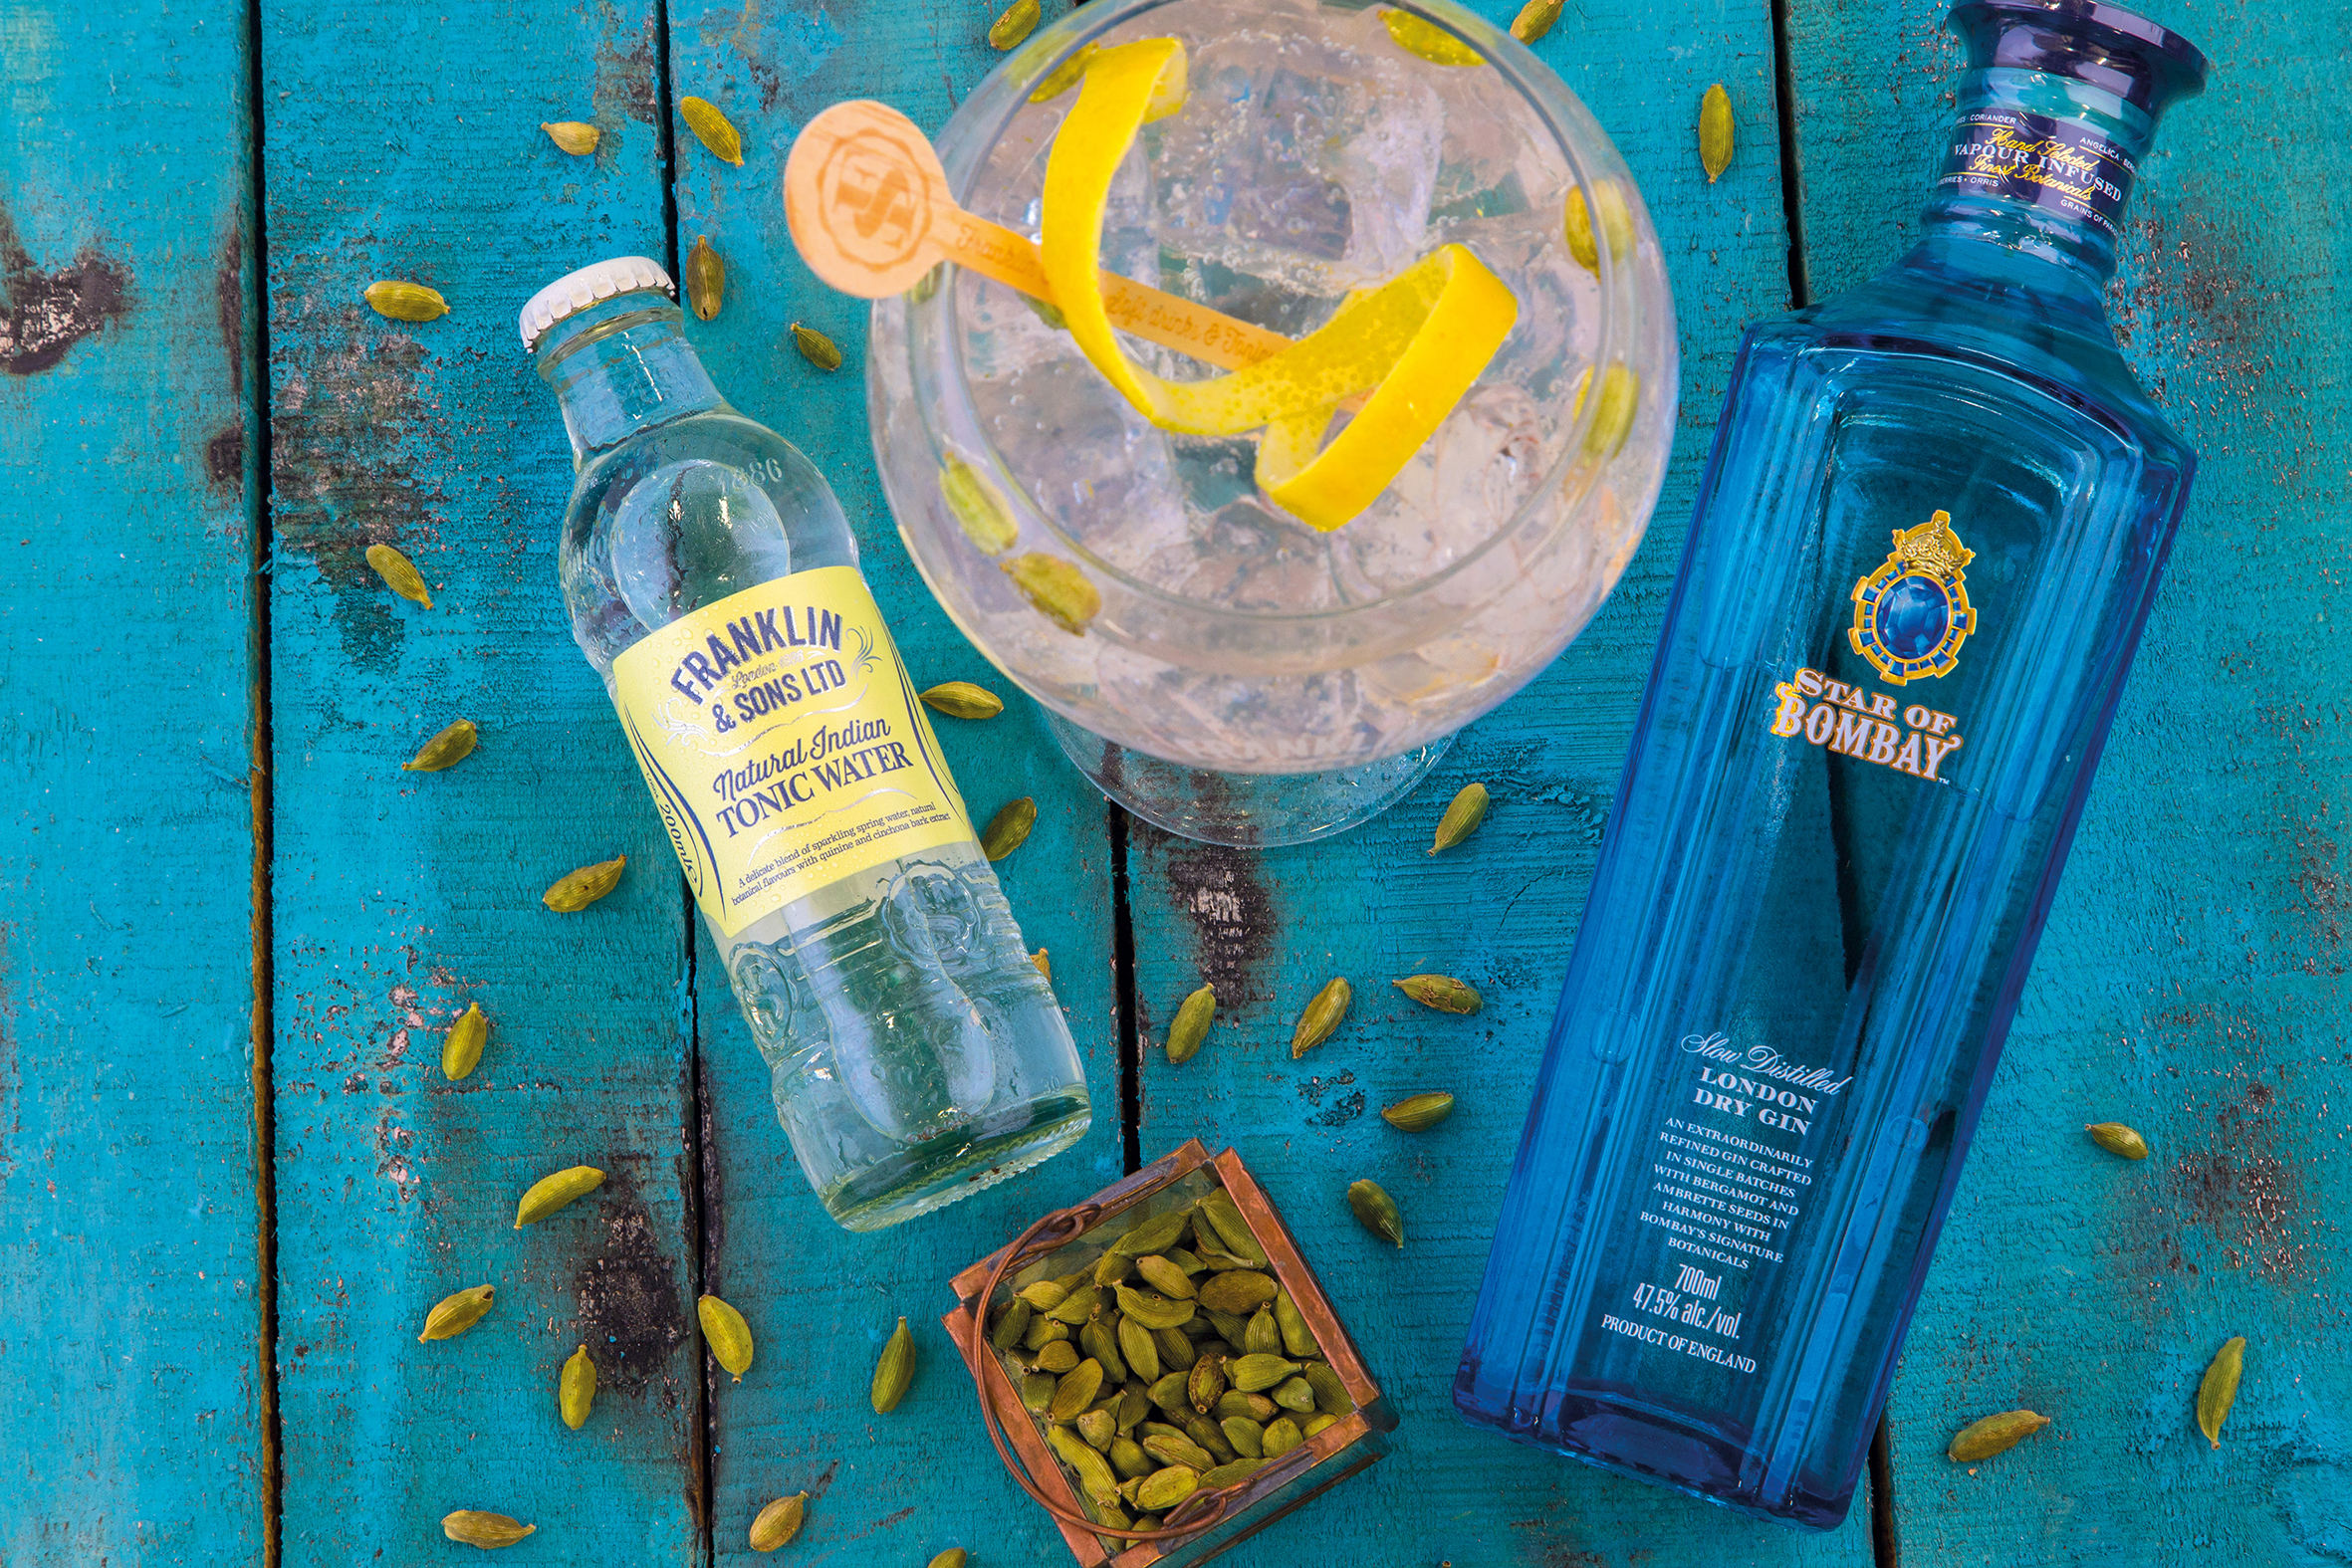 Star of Bombay & Natural Indian Tonic Water